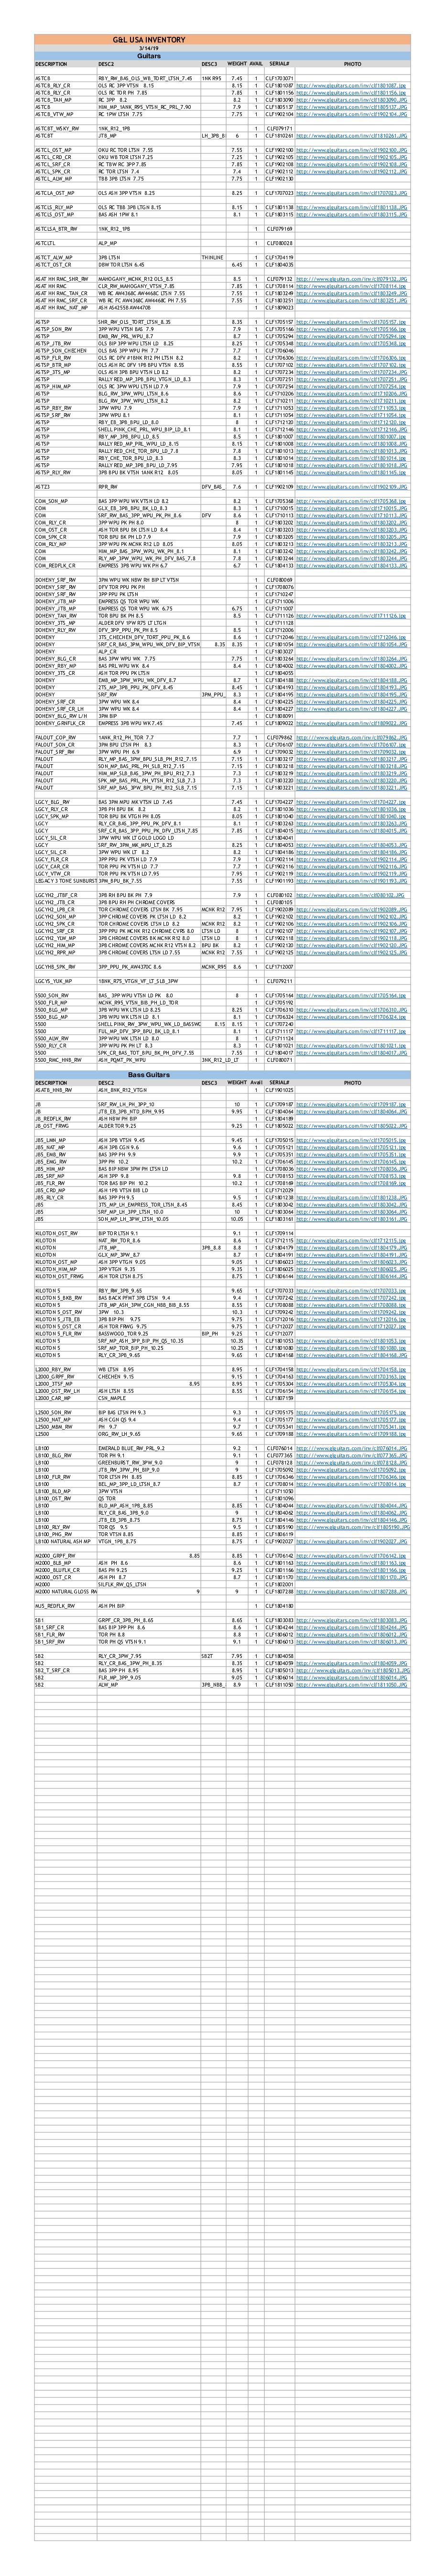 G&L Inventory-03/14/2019 (PDF) - with Option Codes